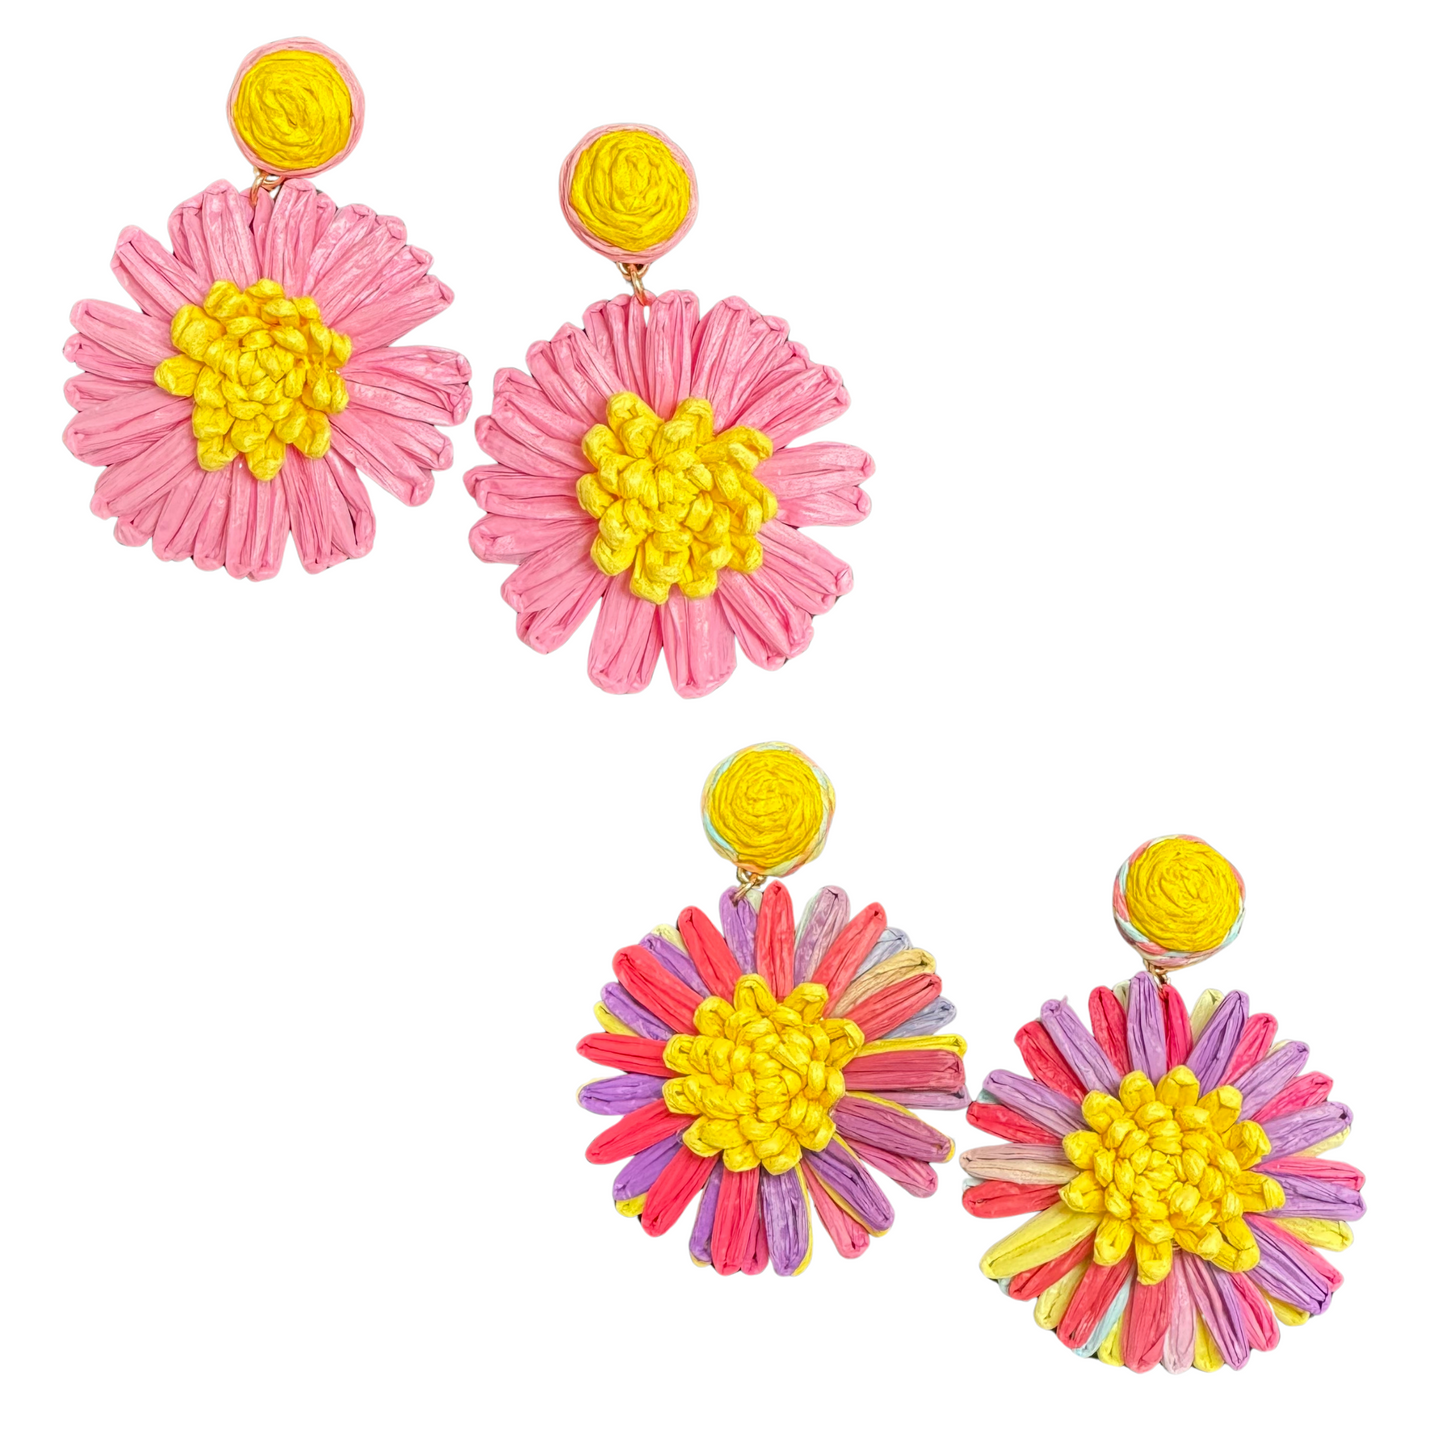 Add a touch of spring to your jewelry collection with our elegant Raffia Flower Earrings. Available in pink or multicolor, these dangle earrings feature delicate raffia flowers for a feminine and stylish look. Perfect for any occasion, these earrings bring a pop of color and natural beauty to any outfit.